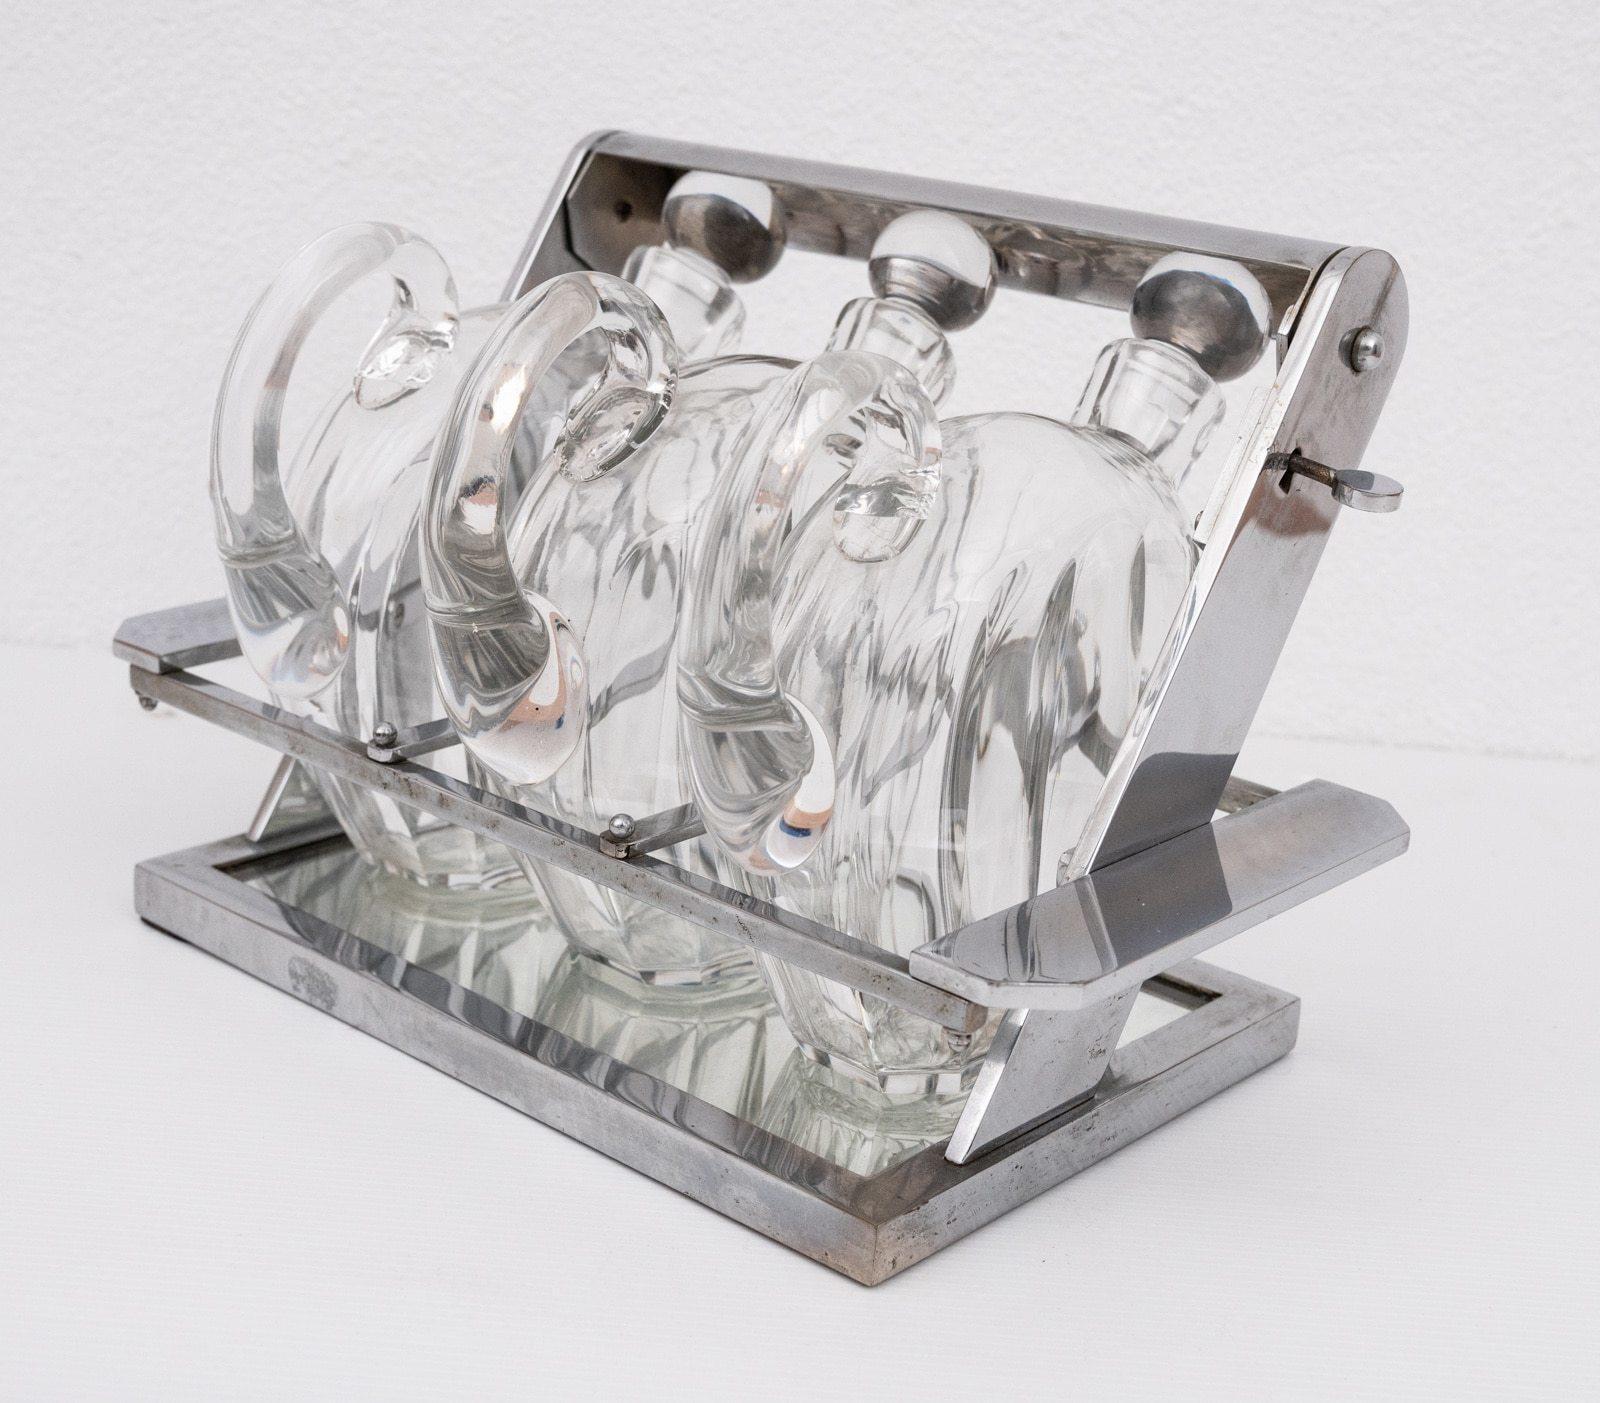 Art Deco period modernist Tanatalus attributed to Jacques Adnet. Complosed of a nickel-plated structure containing 3 carafes by Baccarat with cut sides and complete with handle and stopper. The top of the frame contains closing system and side grip